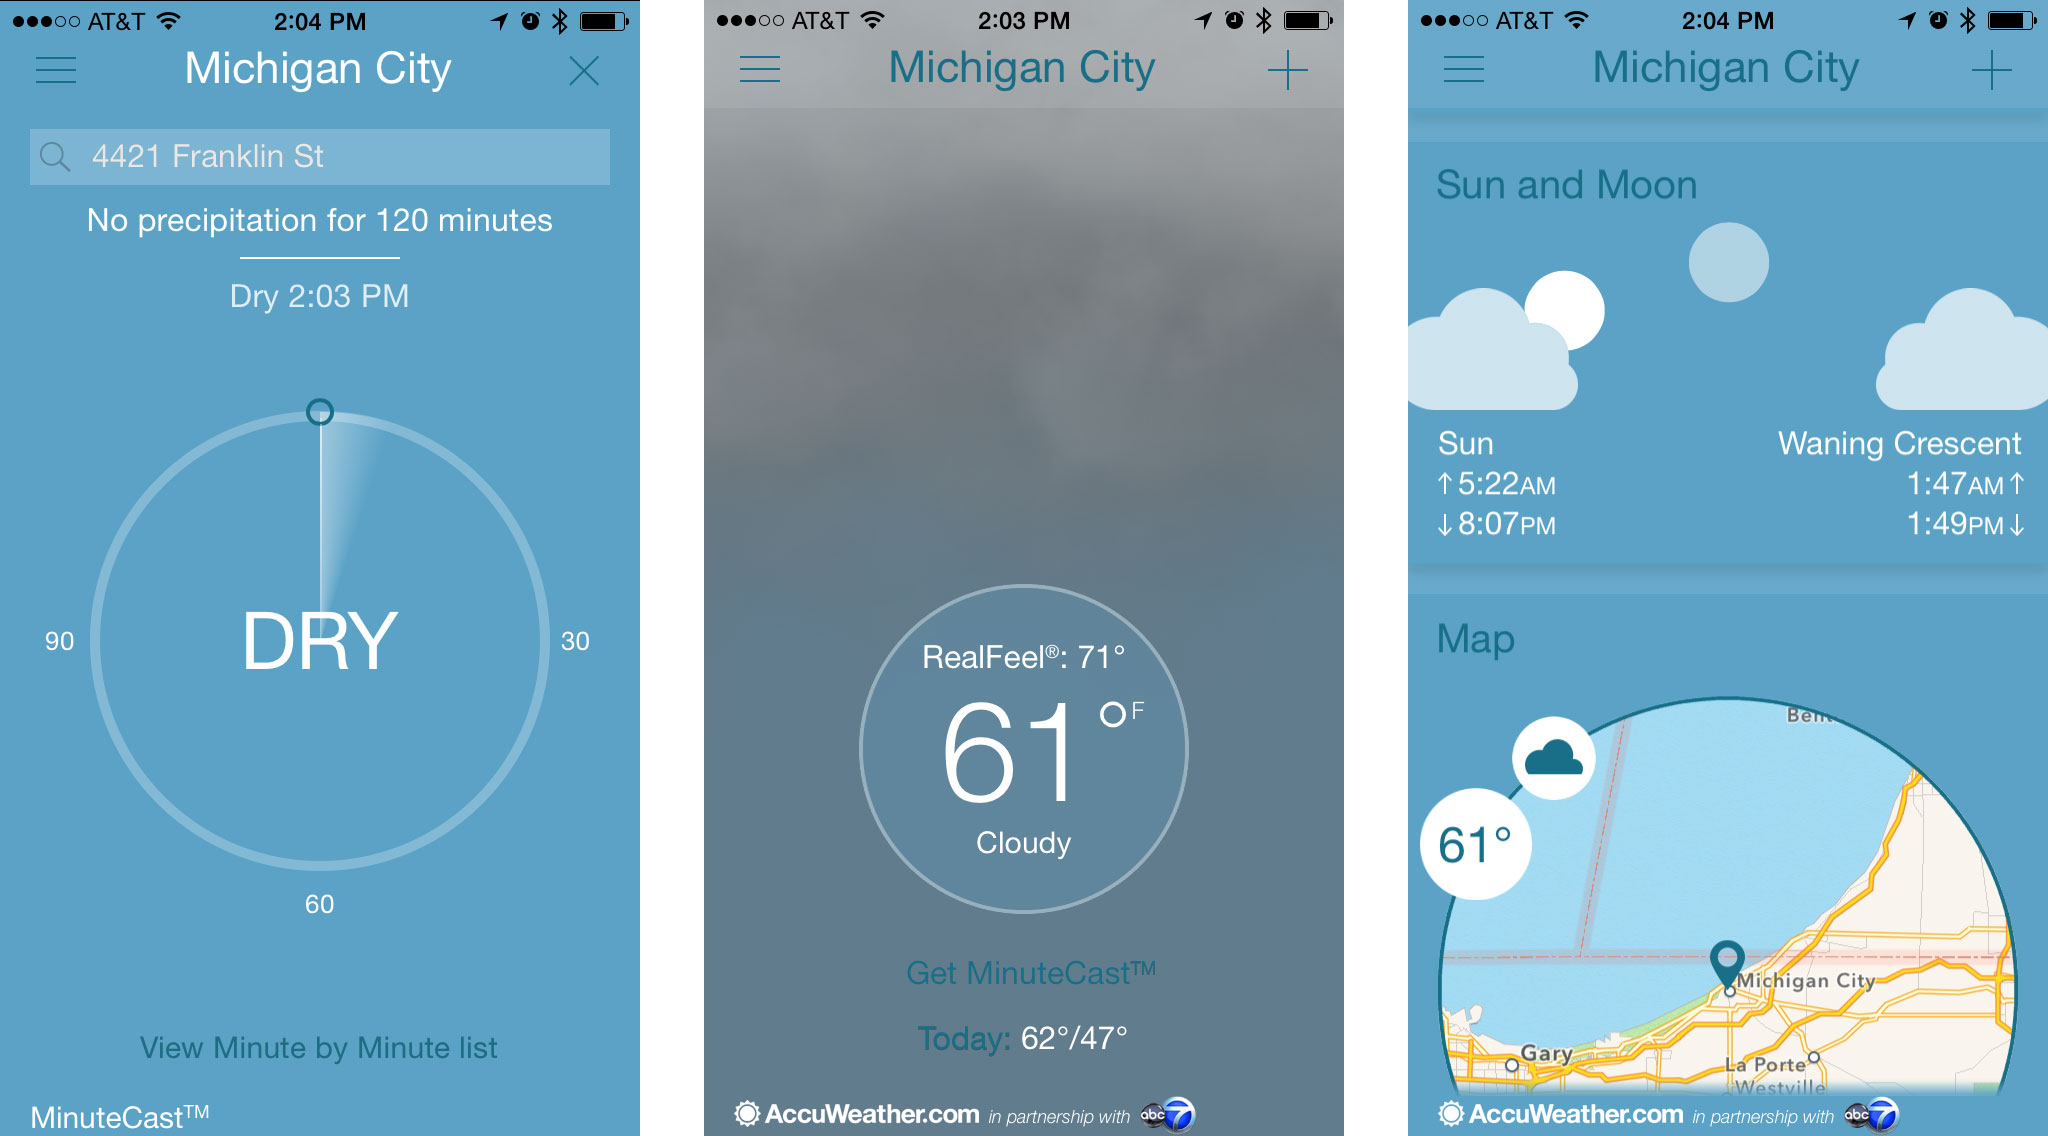 Best Memorial Day apps for iPhone and iPad: Accuweather Platinum